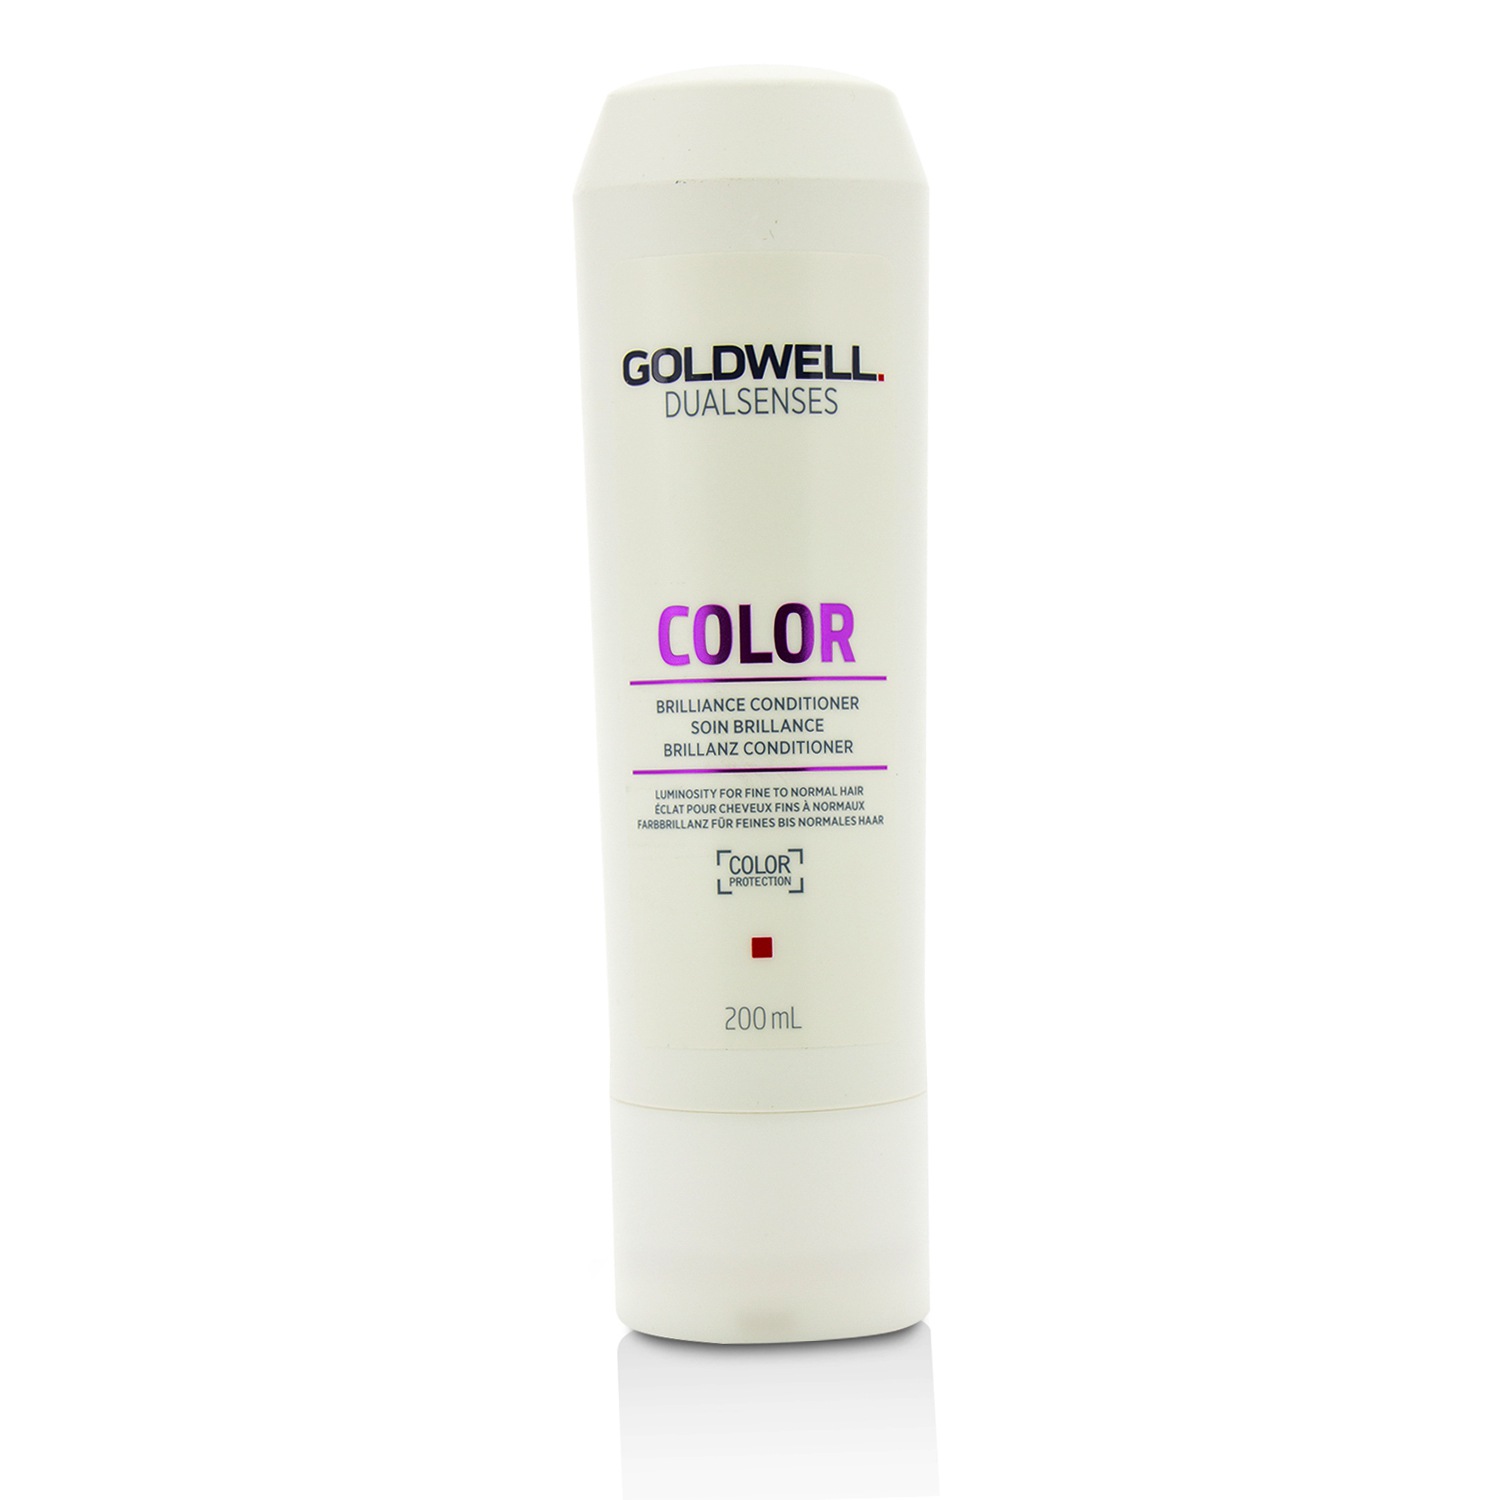 Dual Senses Color Brilliance Conditioner (Luminosity For Fine to Normal Hair) Goldwell Image